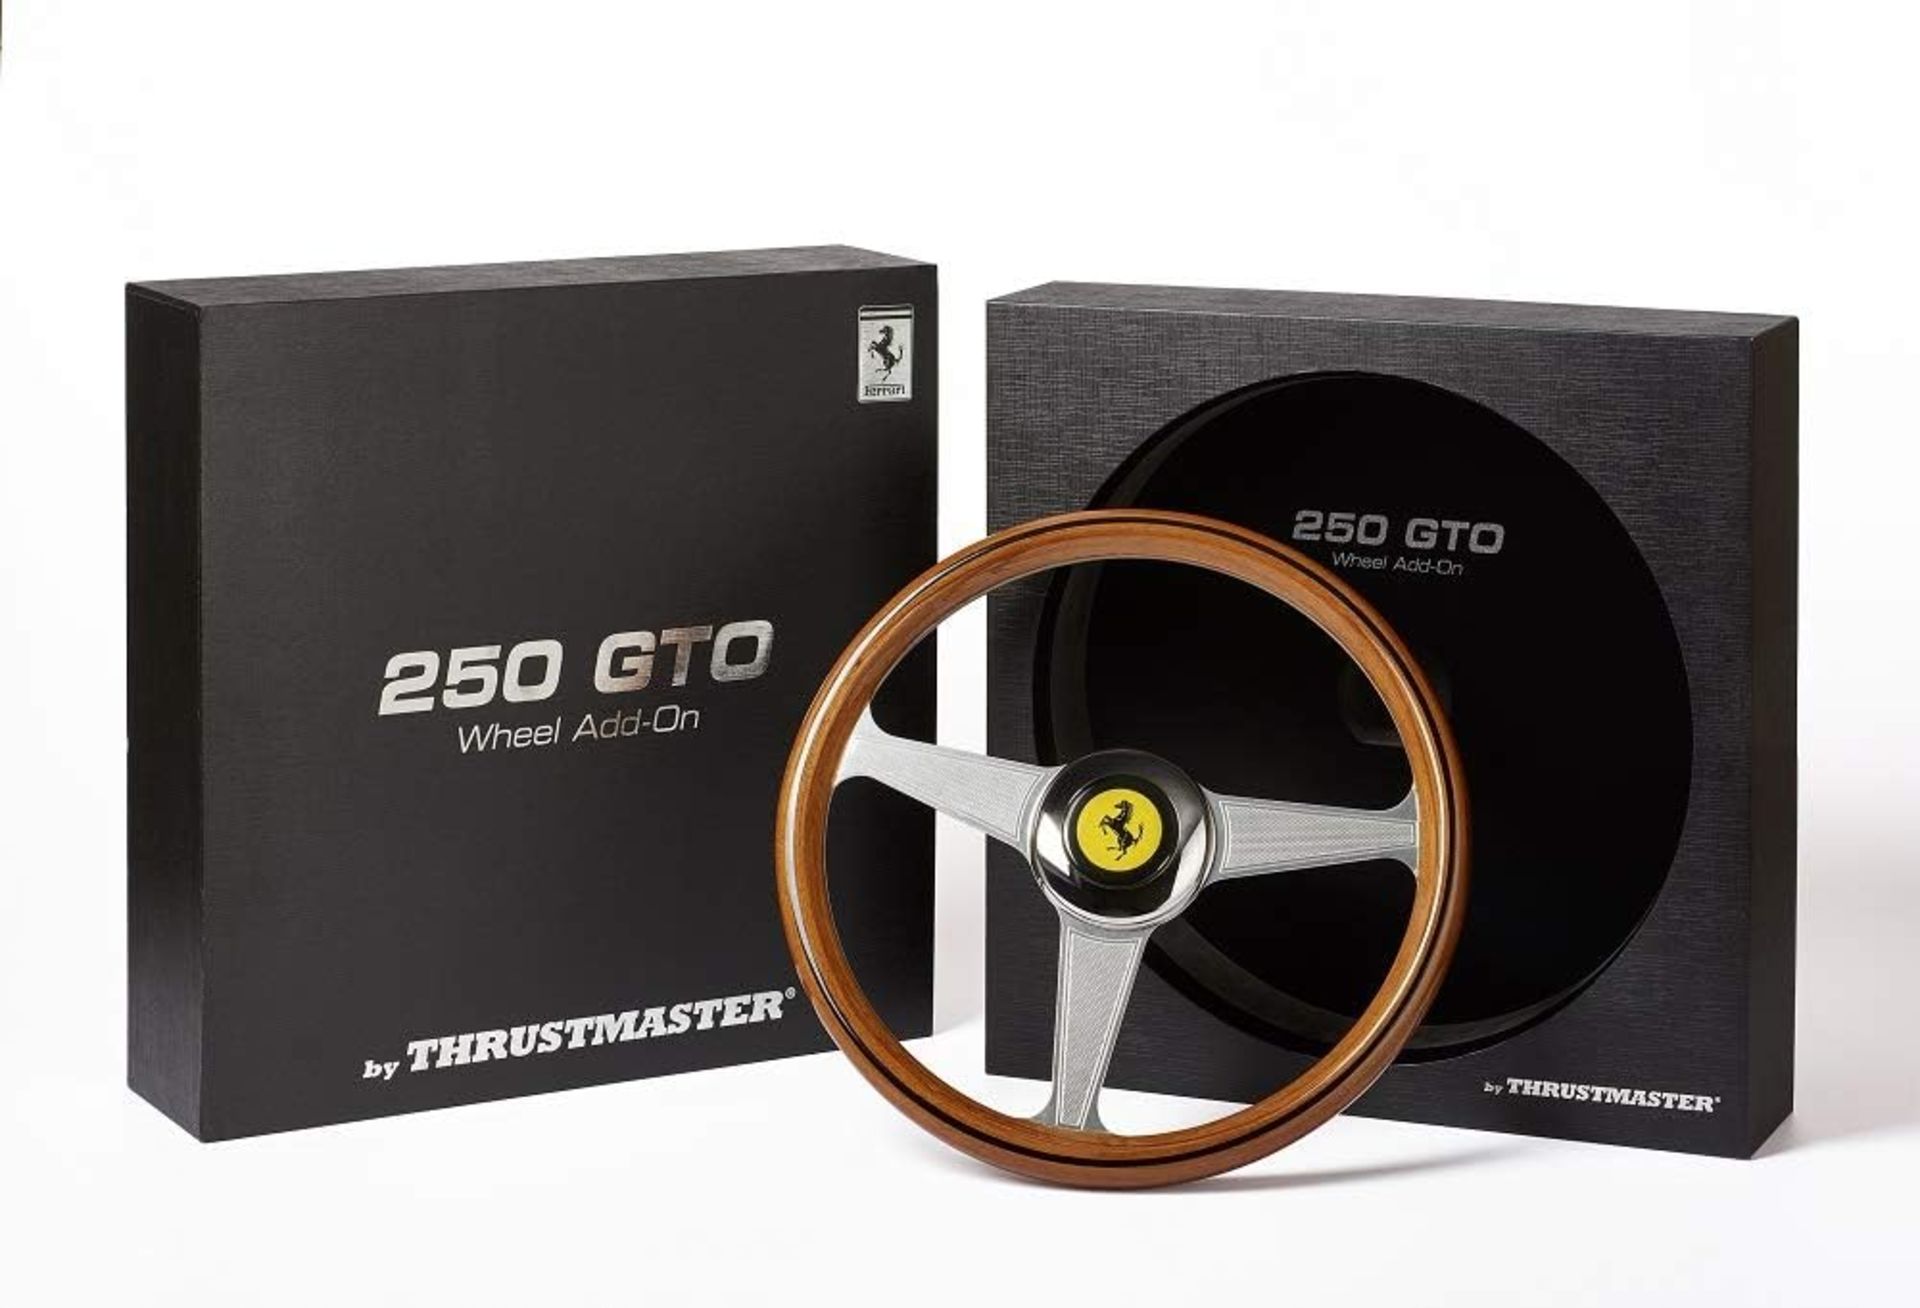 NEW & BOXED THRUSTMASTER FERRARI 250 GTO Wheel Add On. RRP £344.99. Officially licensed by